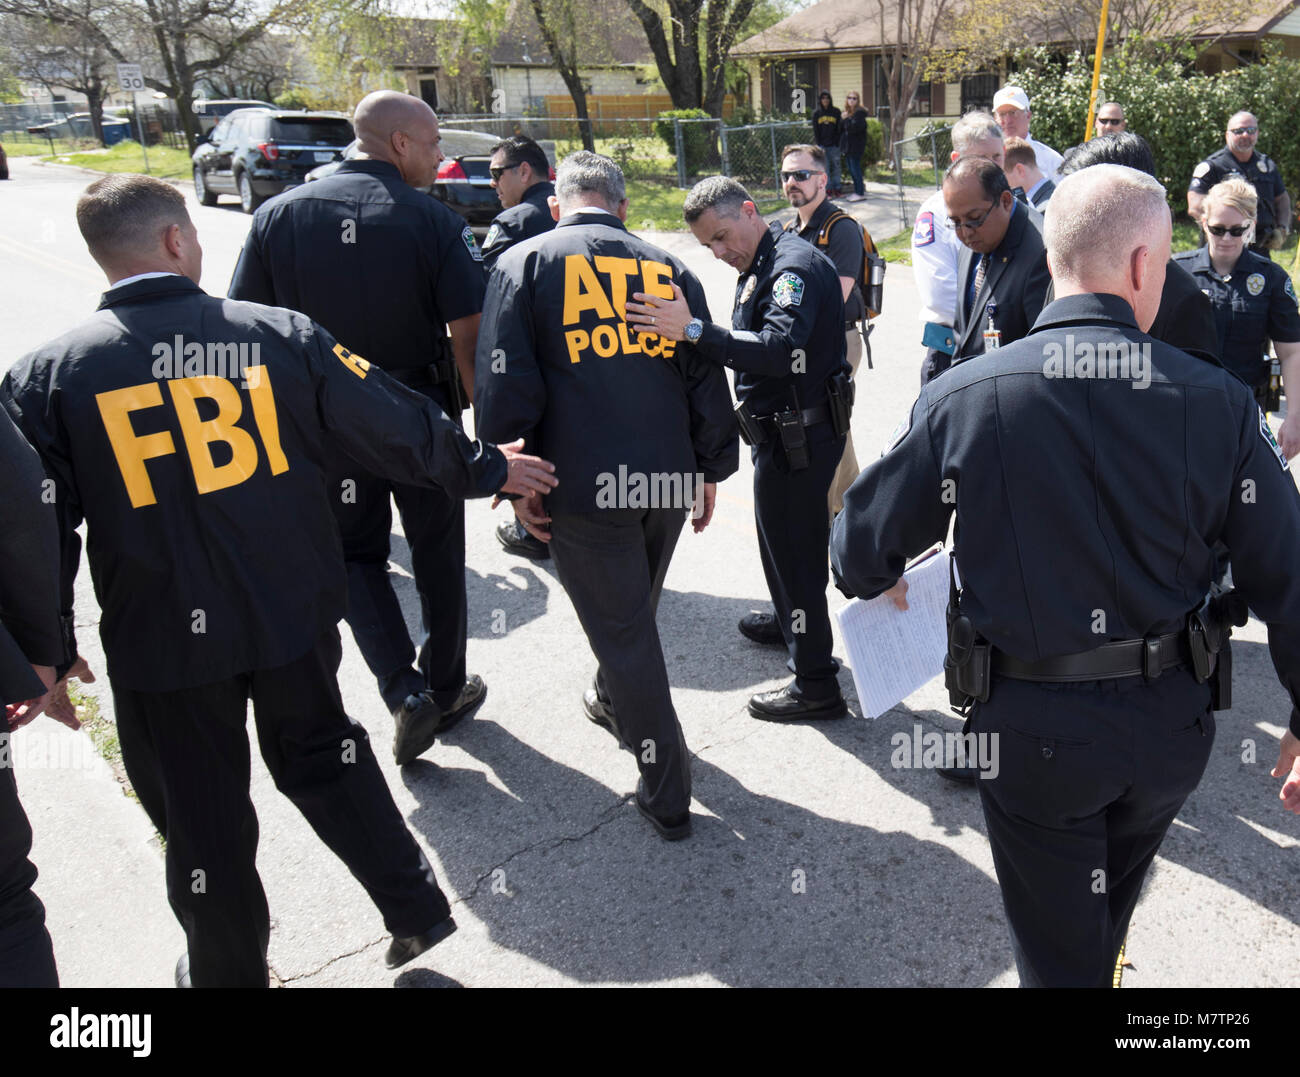 Agents from the FBI and Bureau of Alcohol, Tobacco and Firearms (ATF) walk  in a residential neighborhood in east Austin where a package bomb exploded  Monday, injuring an elderly Austin resident. The